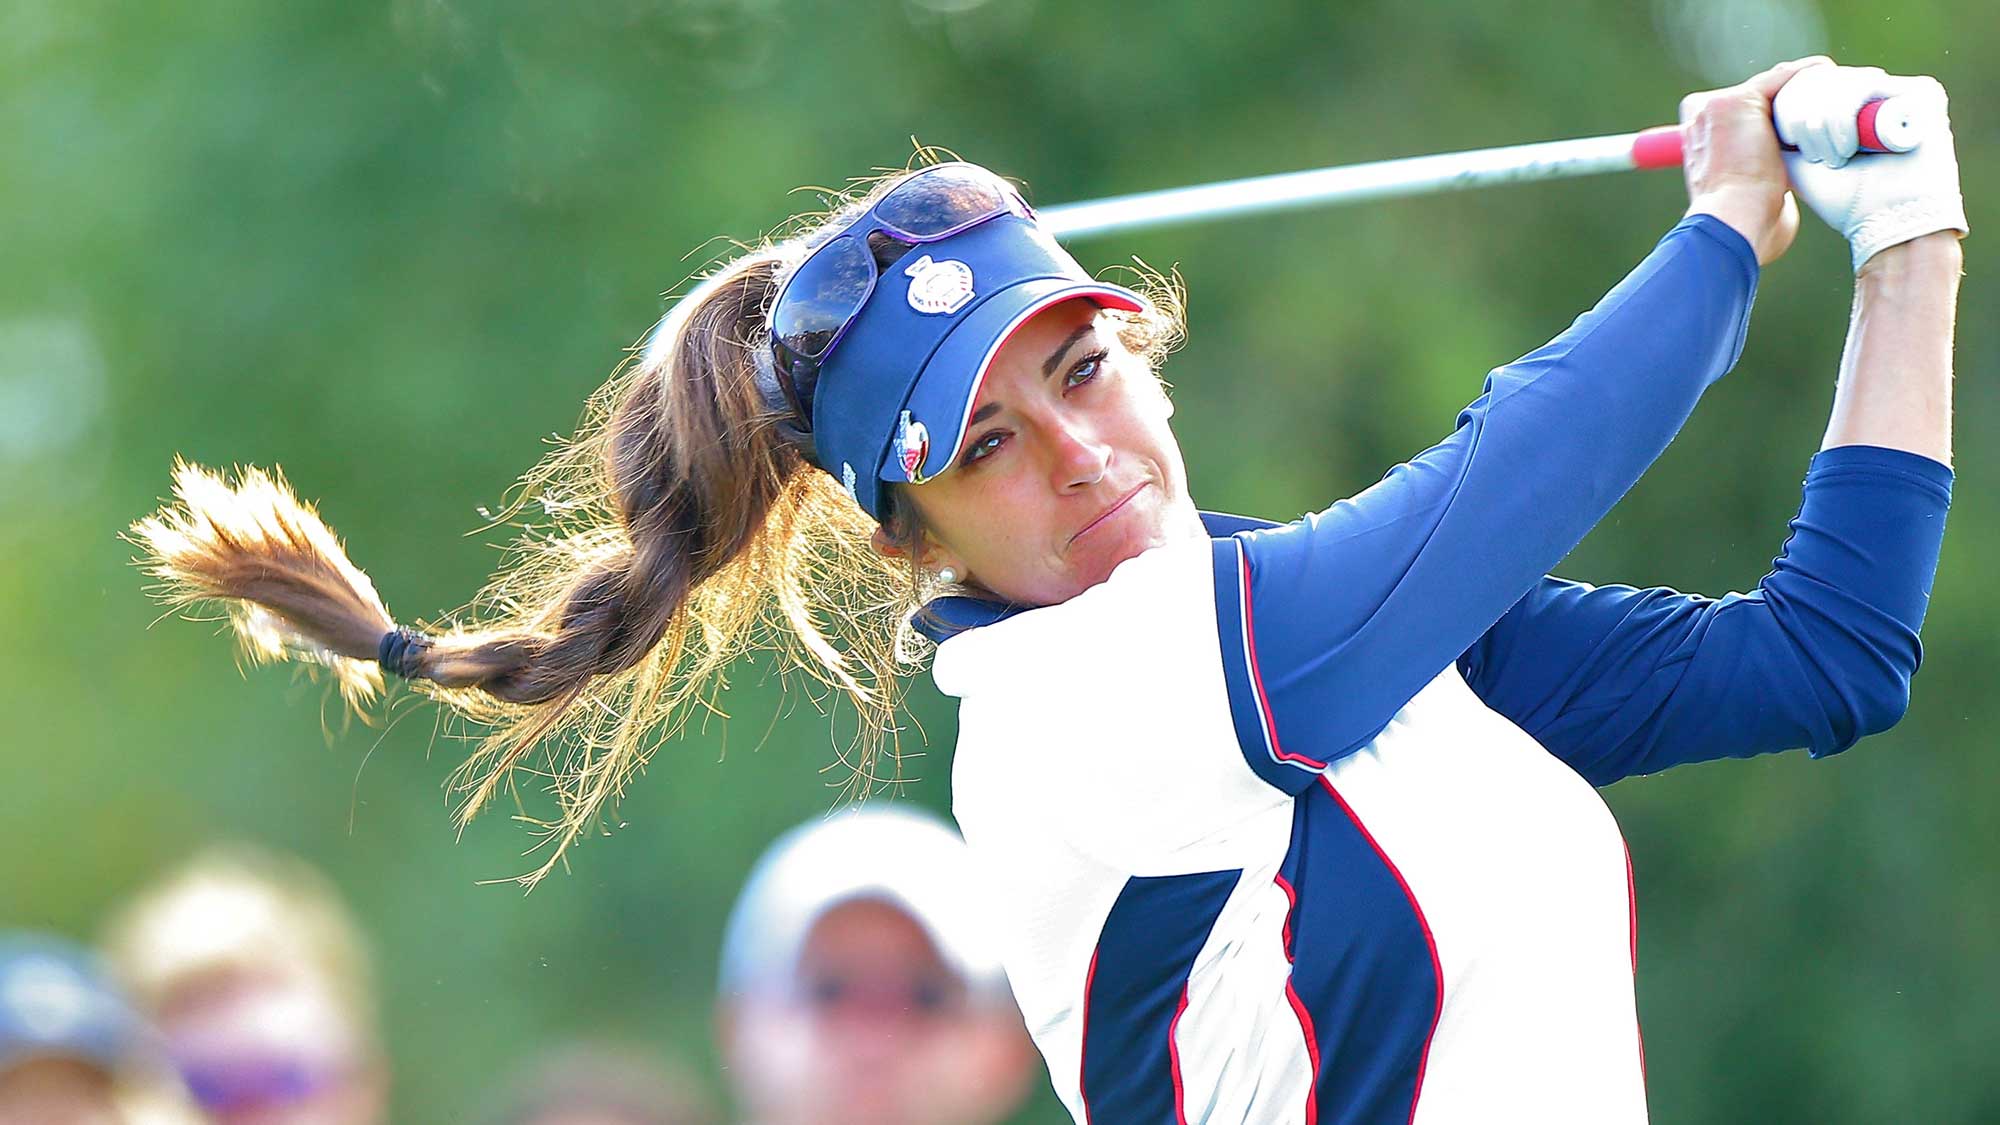 In-Kyung Kim a deserved major winner and Solheim Cup 